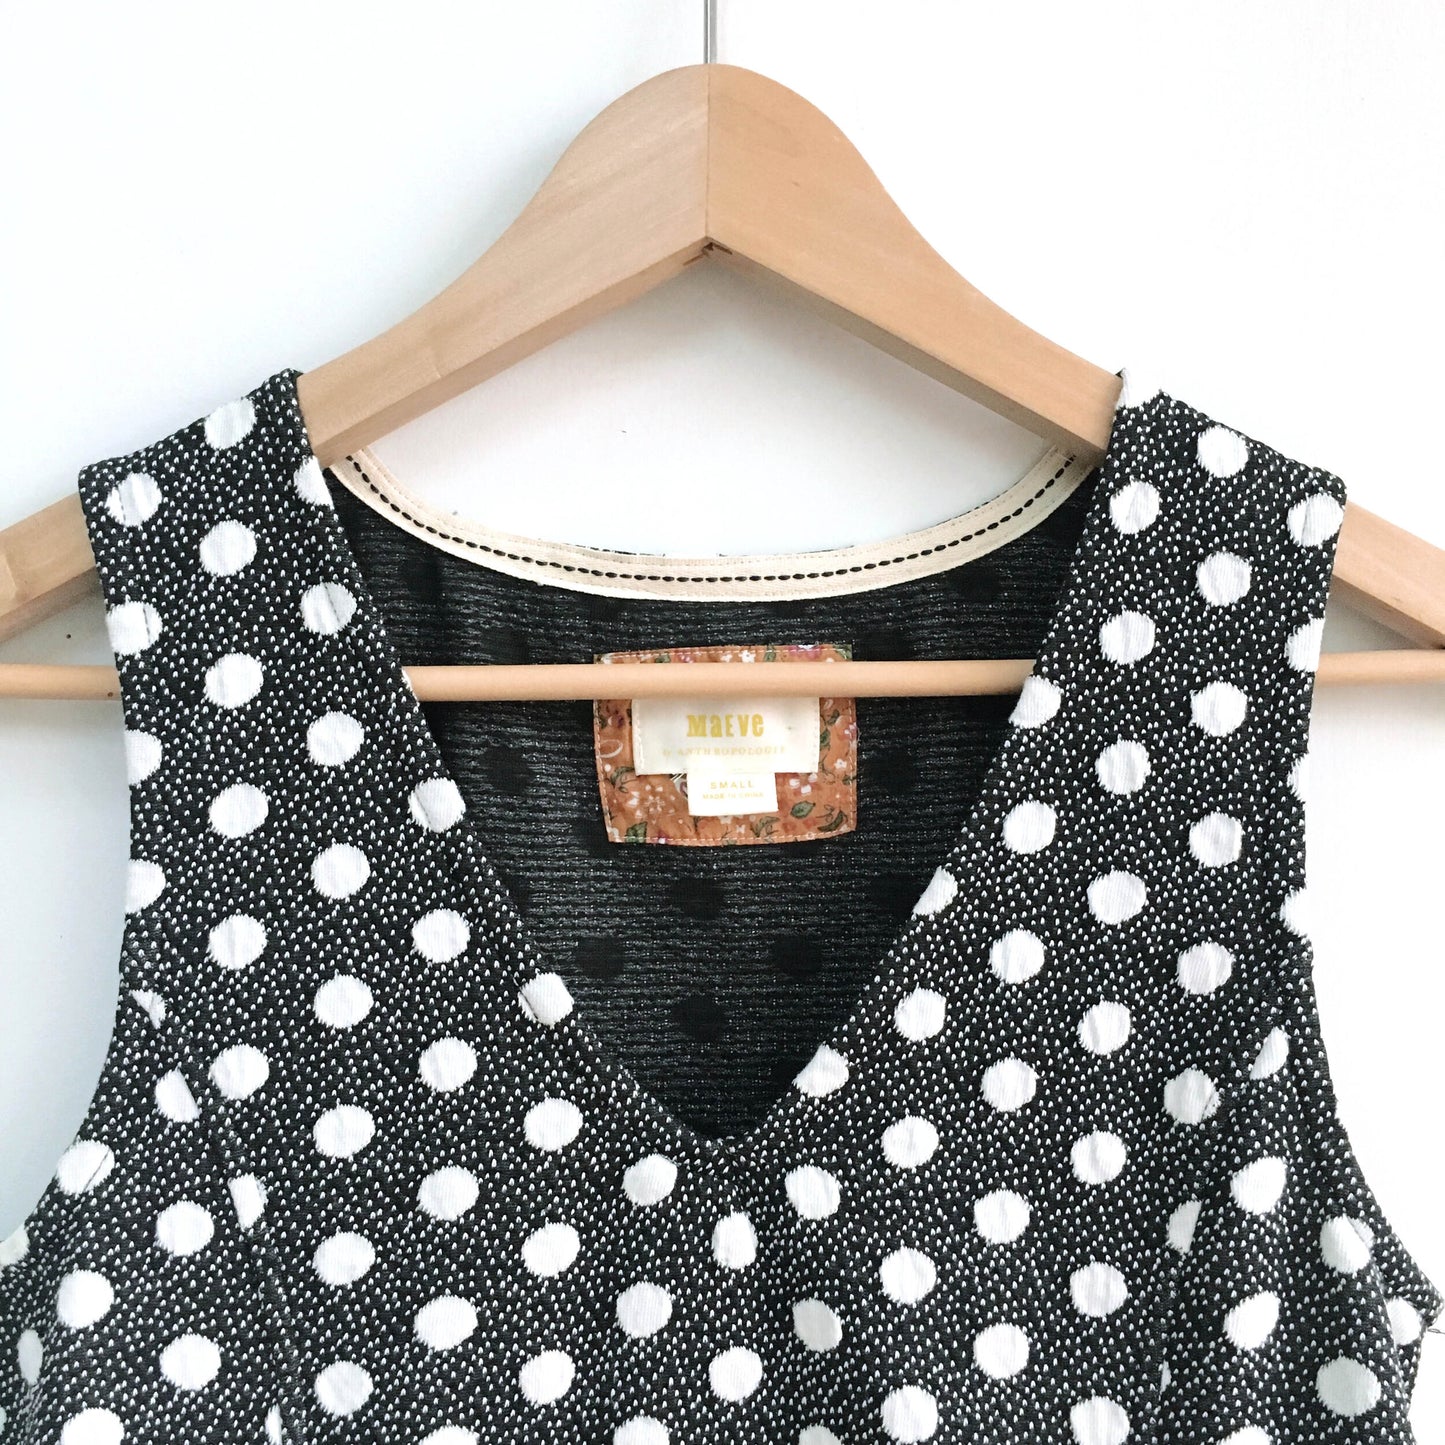 Maeve textured polka-dot knit top - size Small